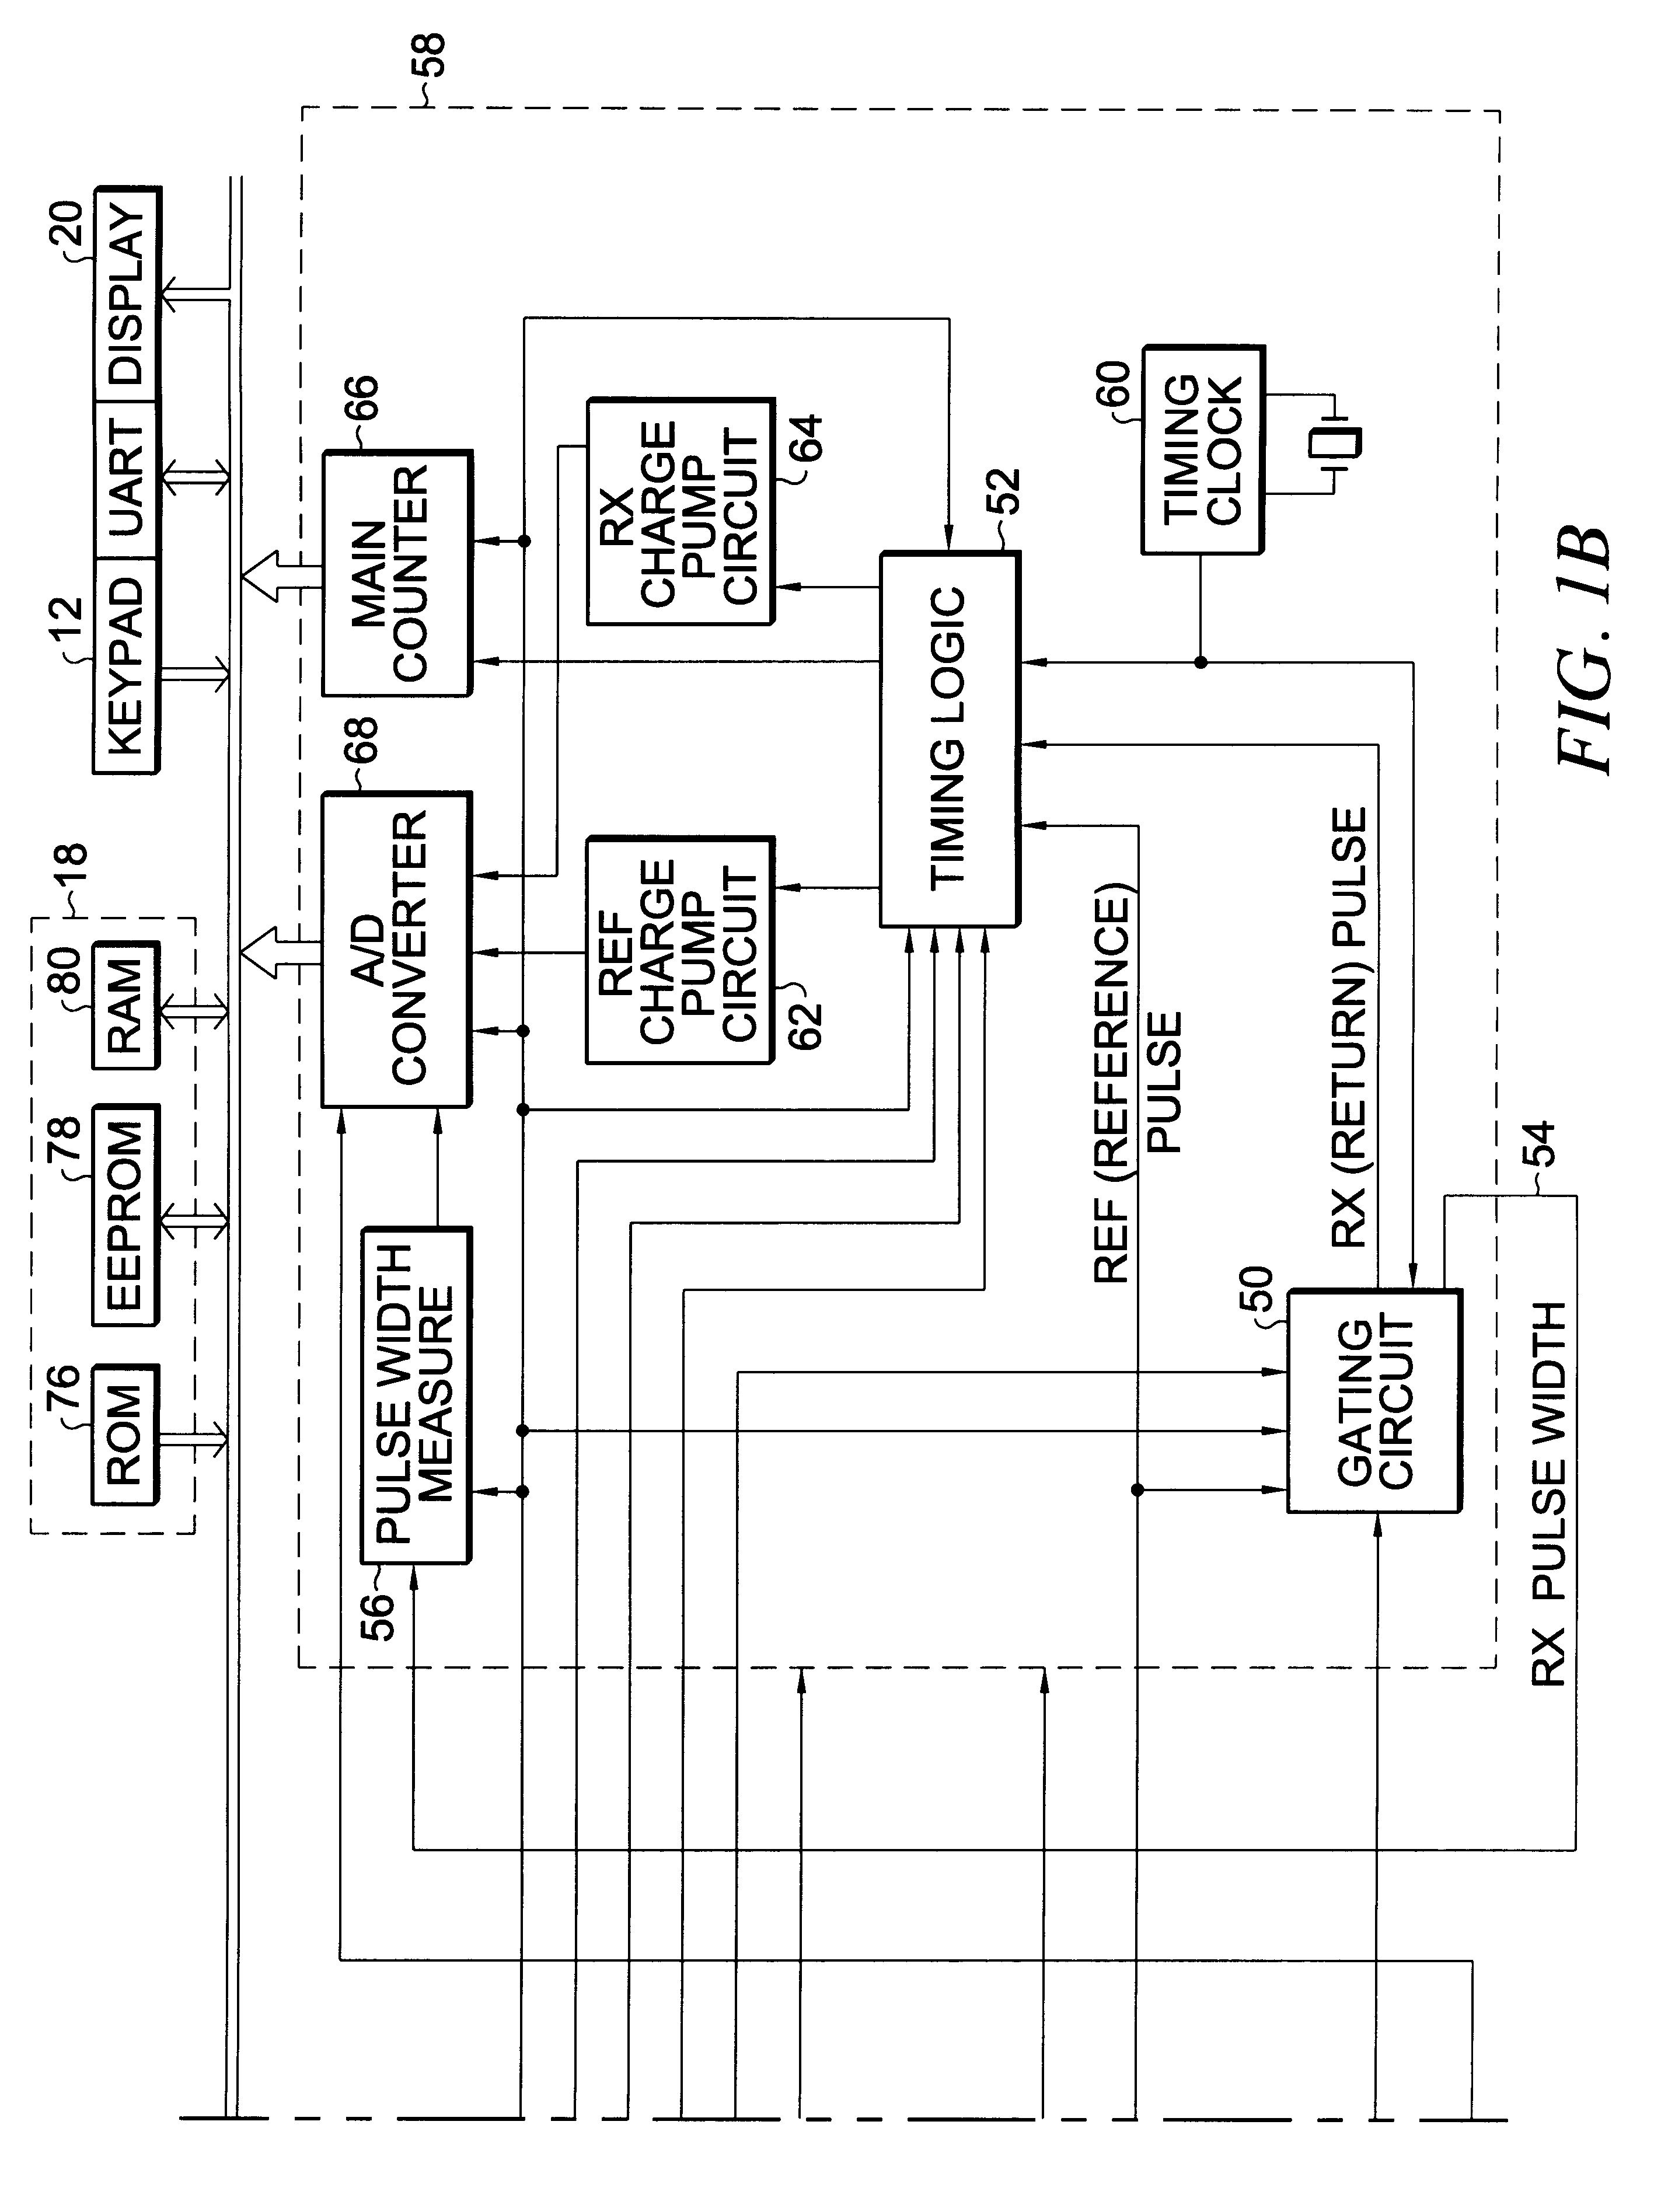 Apparatus and method for determining precision reflectivity of highway signs and other reflective objects utilizing an optical range finder instrument